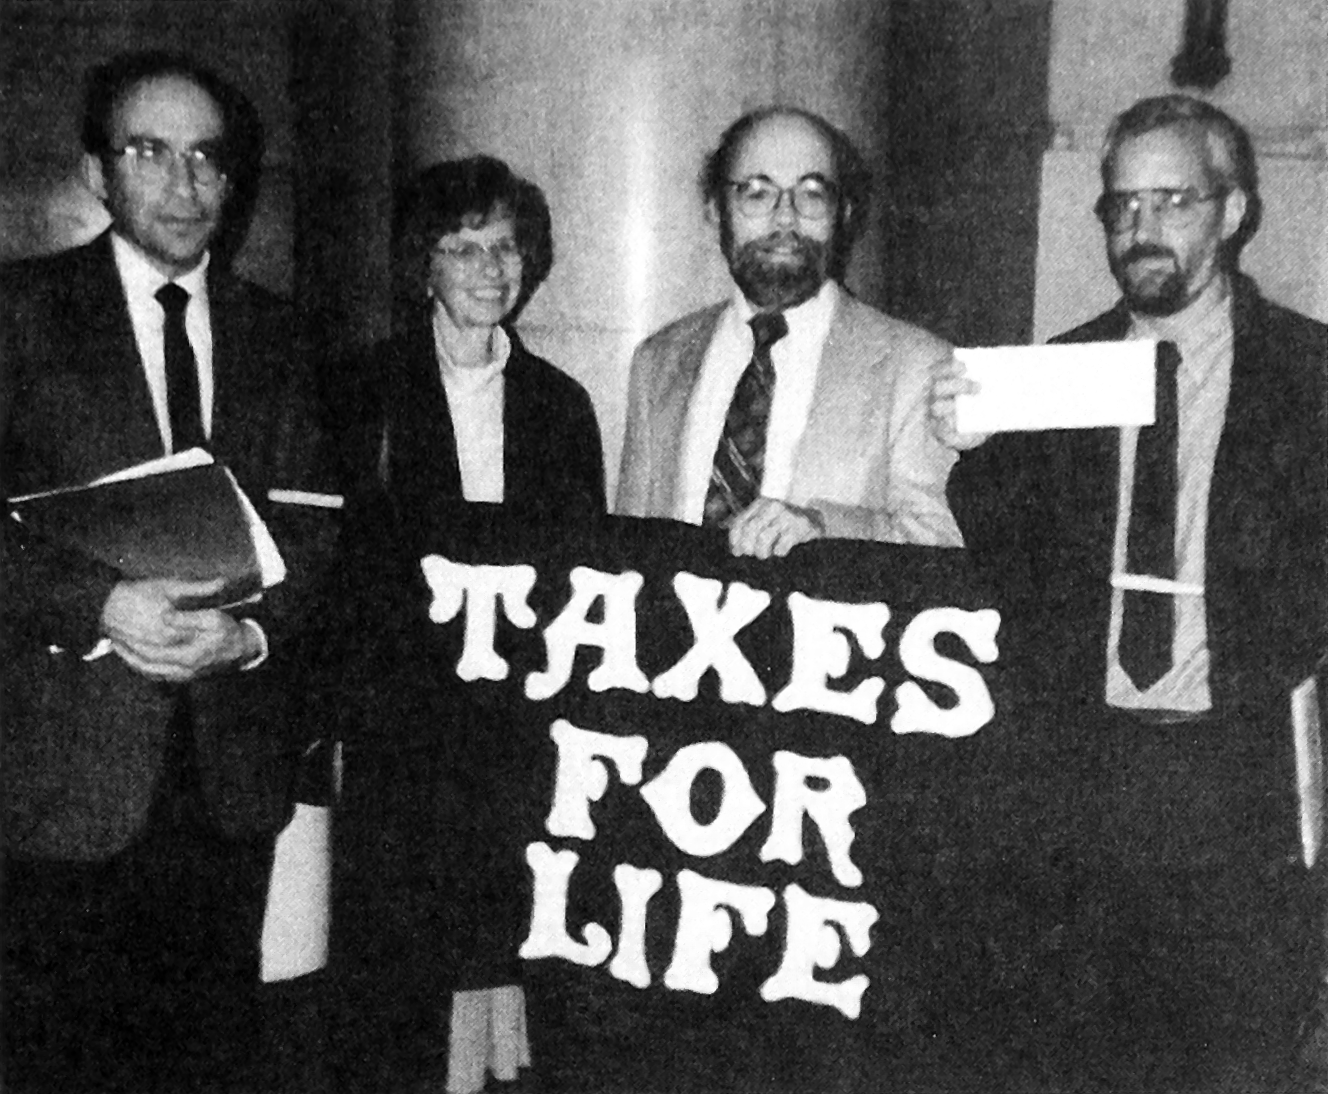 Herb Myers, Annn Marie Judson, John Stoner, and Dave Schrock-Shenk, facing the camera, stand behind a “Taxes For Life” banner. Schrock-Shenk holds up a check.